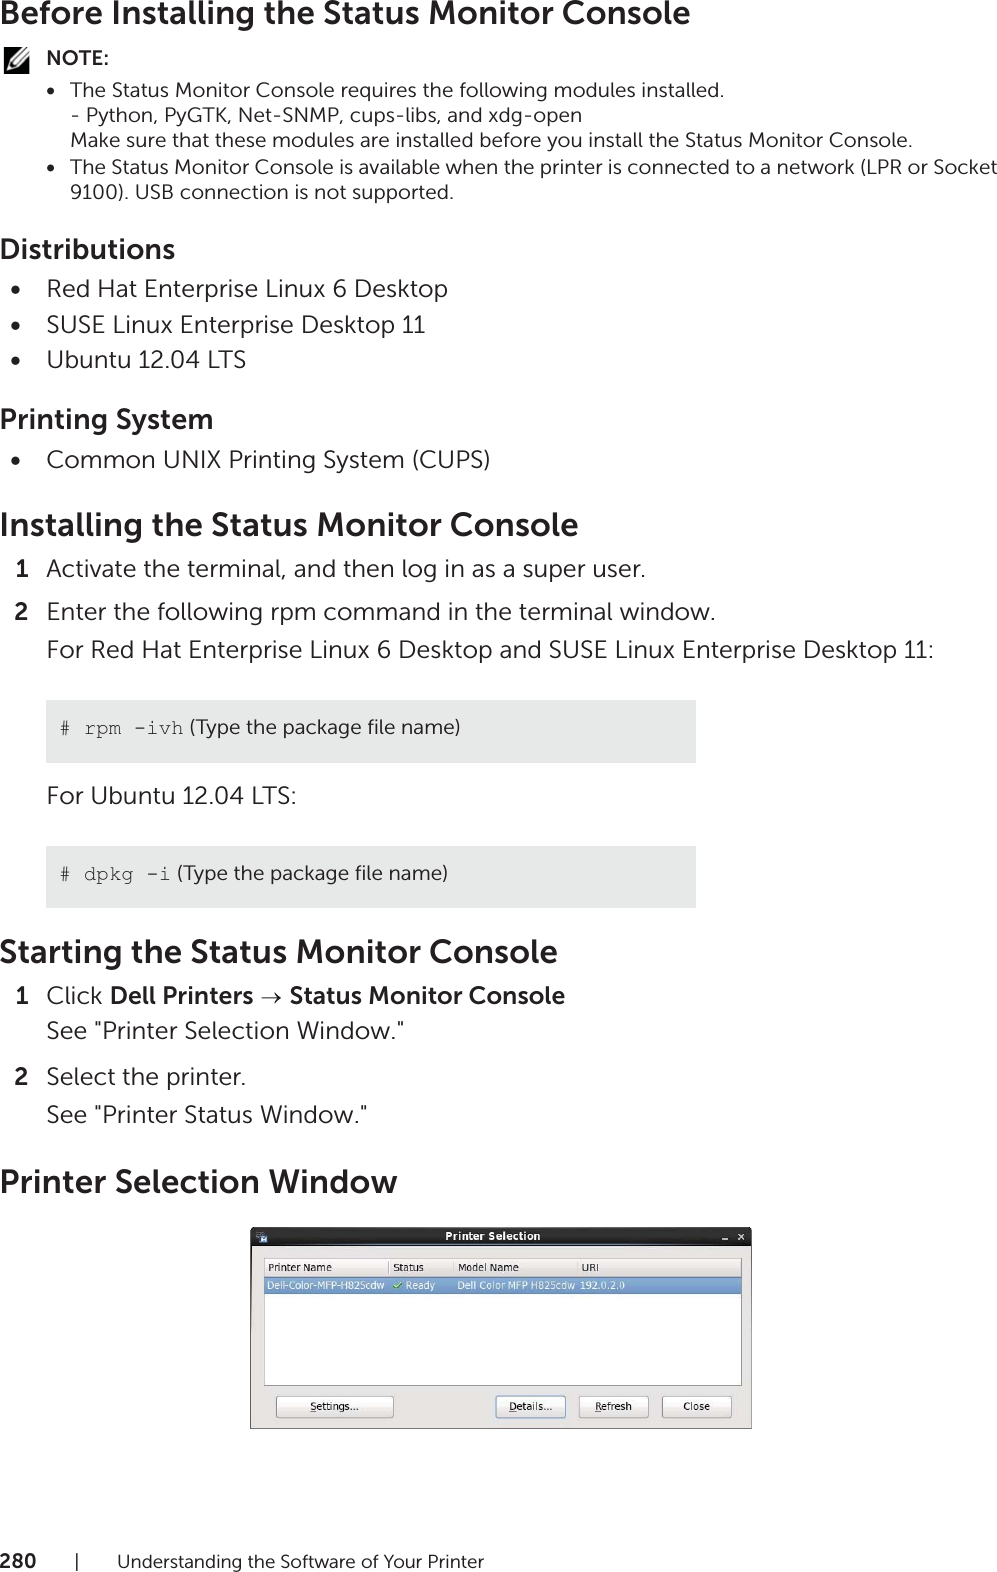 280| Understanding the Software of Your PrinterBefore Installing the Status Monitor ConsoleNOTE:•The Status Monitor Console requires the following modules installed.- Python, PyGTK, Net-SNMP, cups-libs, and xdg-openMake sure that these modules are installed before you install the Status Monitor Console.•The Status Monitor Console is available when the printer is connected to a network (LPR or Socket 9100). USB connection is not supported.Distributions•Red Hat Enterprise Linux 6 Desktop•SUSE Linux Enterprise Desktop 11•Ubuntu 12.04 LTSPrinting System•Common UNIX Printing System (CUPS)Installing the Status Monitor Console1Activate the terminal, and then log in as a super user.2Enter the following rpm command in the terminal window.For Red Hat Enterprise Linux 6 Desktop and SUSE Linux Enterprise Desktop 11:For Ubuntu 12.04 LTS:Starting the Status Monitor Console1Click Dell Printers   Status Monitor ConsoleSee &quot;Printer Selection Window.&quot;2Select the printer.See &quot;Printer Status Window.&quot;Printer Selection Window# rpm -ivh (Type the package file name)# dpkg -i (Type the package file name)